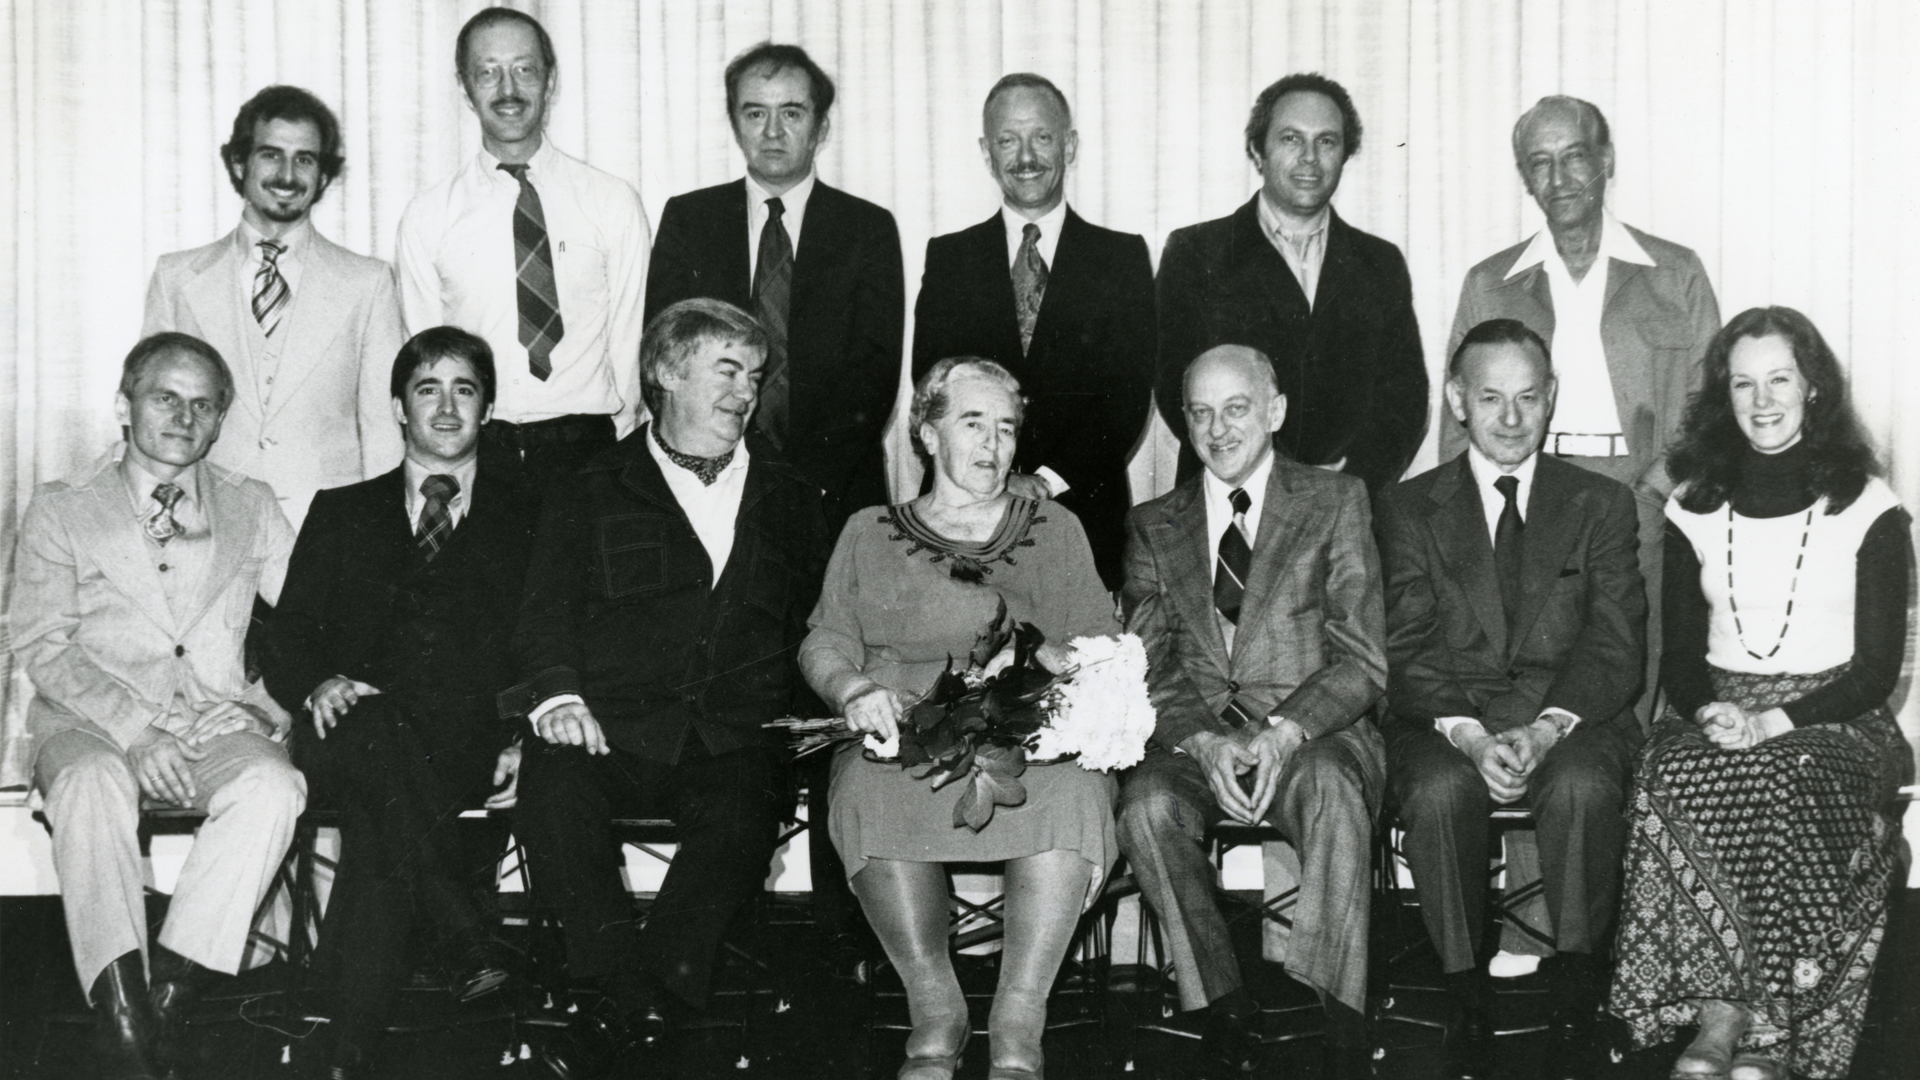 An archival, black and white photo of Mme. Renée Longy is seated center for a portrait style photo with students